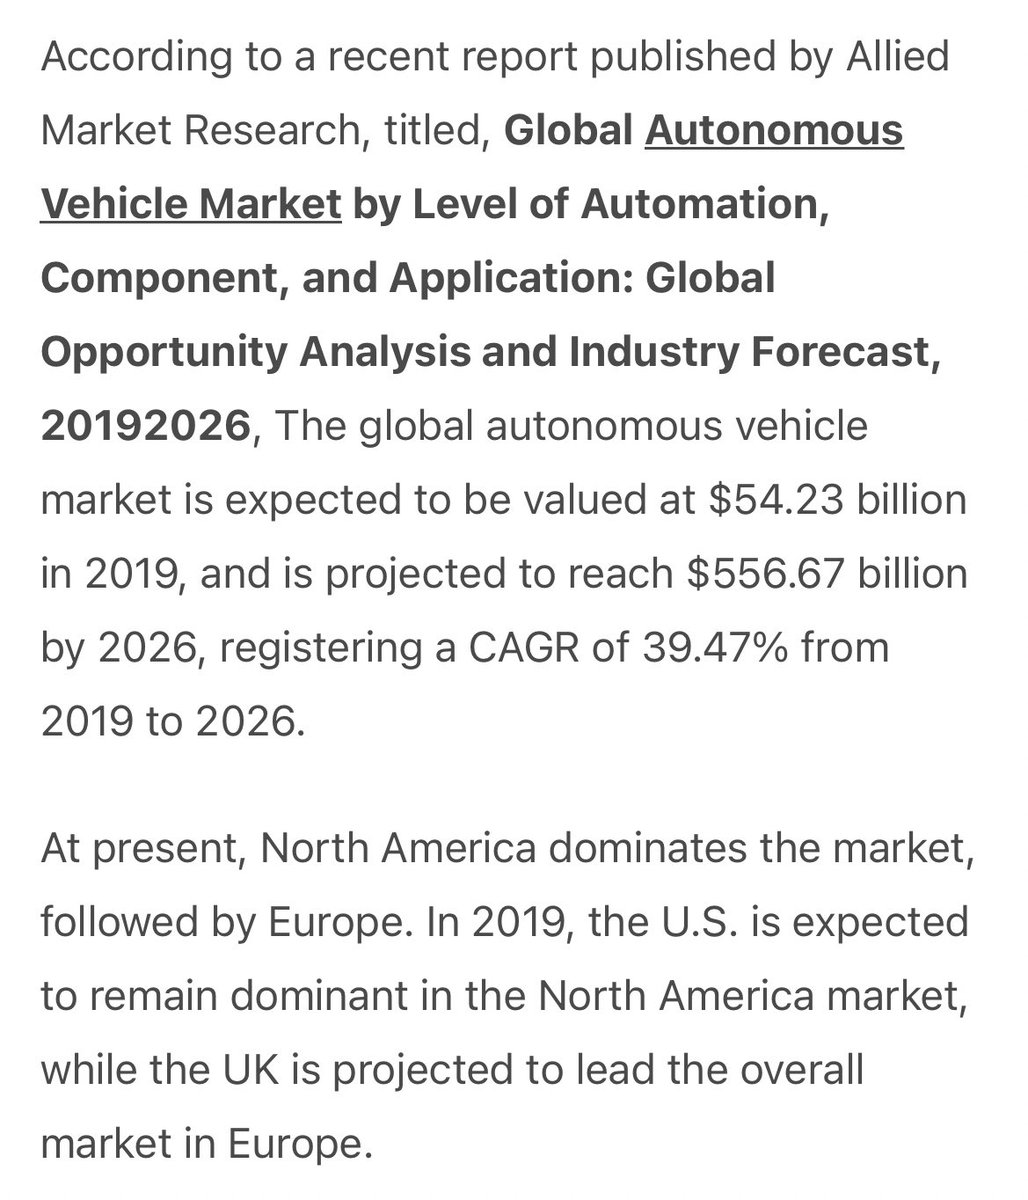 According to a recent report published by Allied Market Research, titled, The global autonomous vehicle market is expected to be valued at $54.23 billion in 2019, and is projected to reach $556.67 billion by 2026, registering a CAGR of 39.47% from 2019 to 2026.